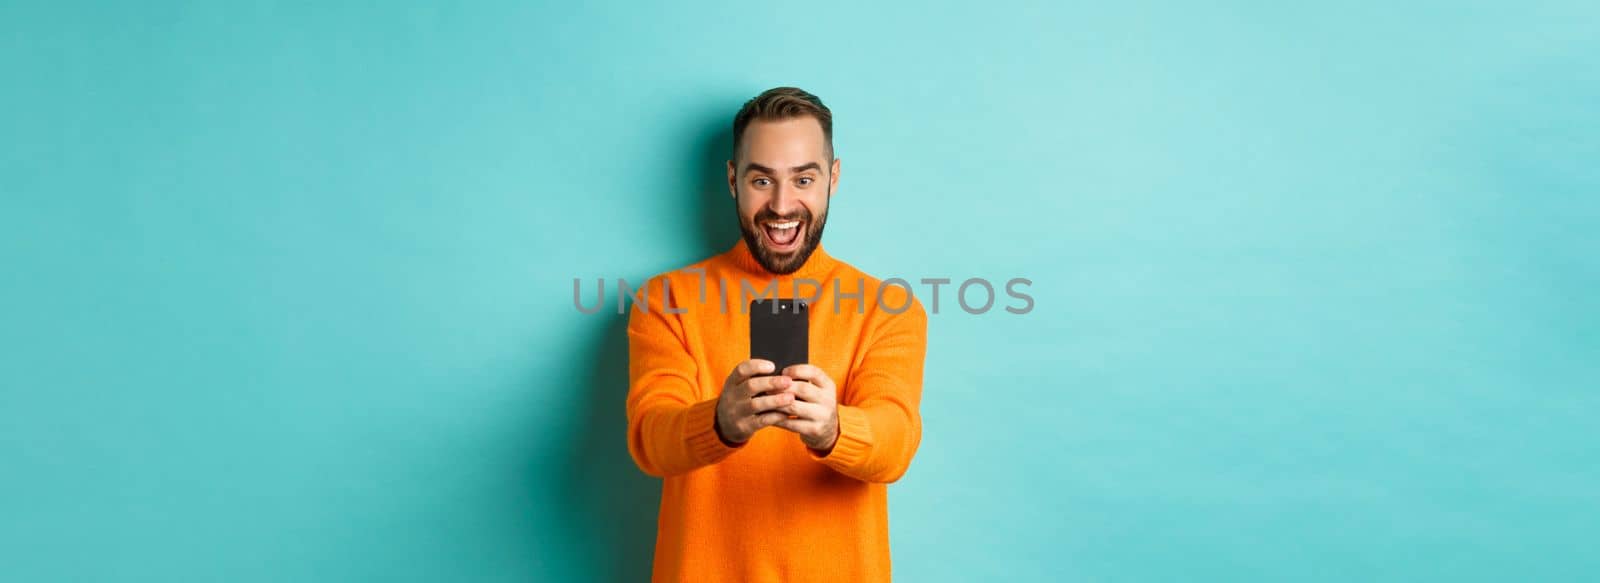 Image of man reading awesome message on mobile phone, looking at smartphone screen with amazement, standing over light blue background.